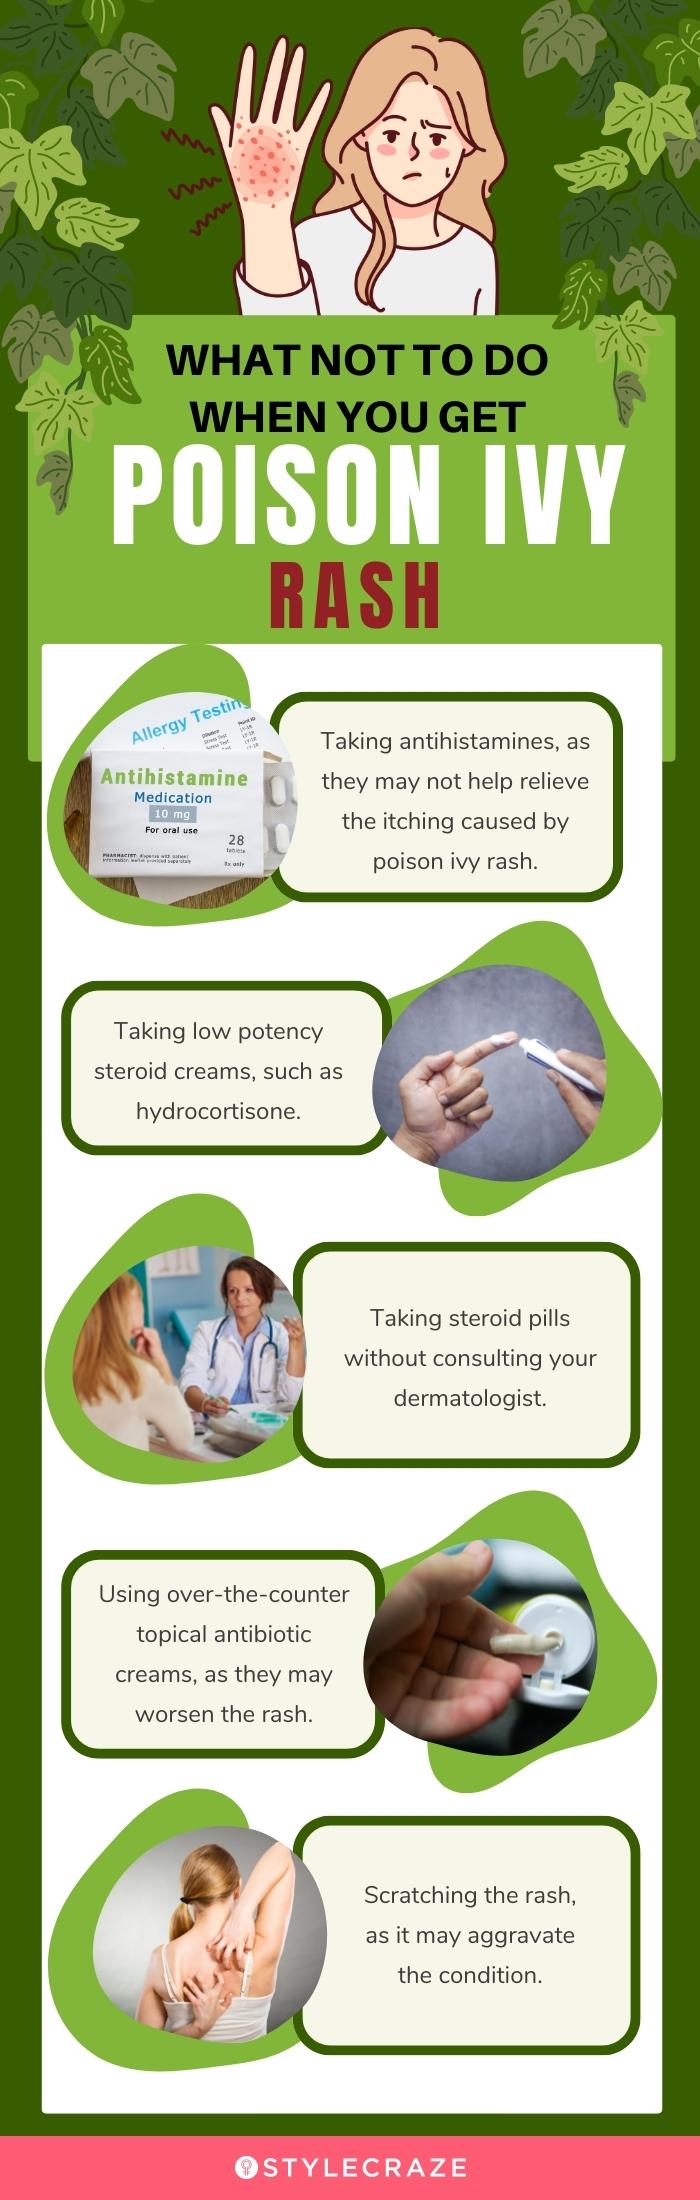 what not to do when you get poison ivy rash (infographic)